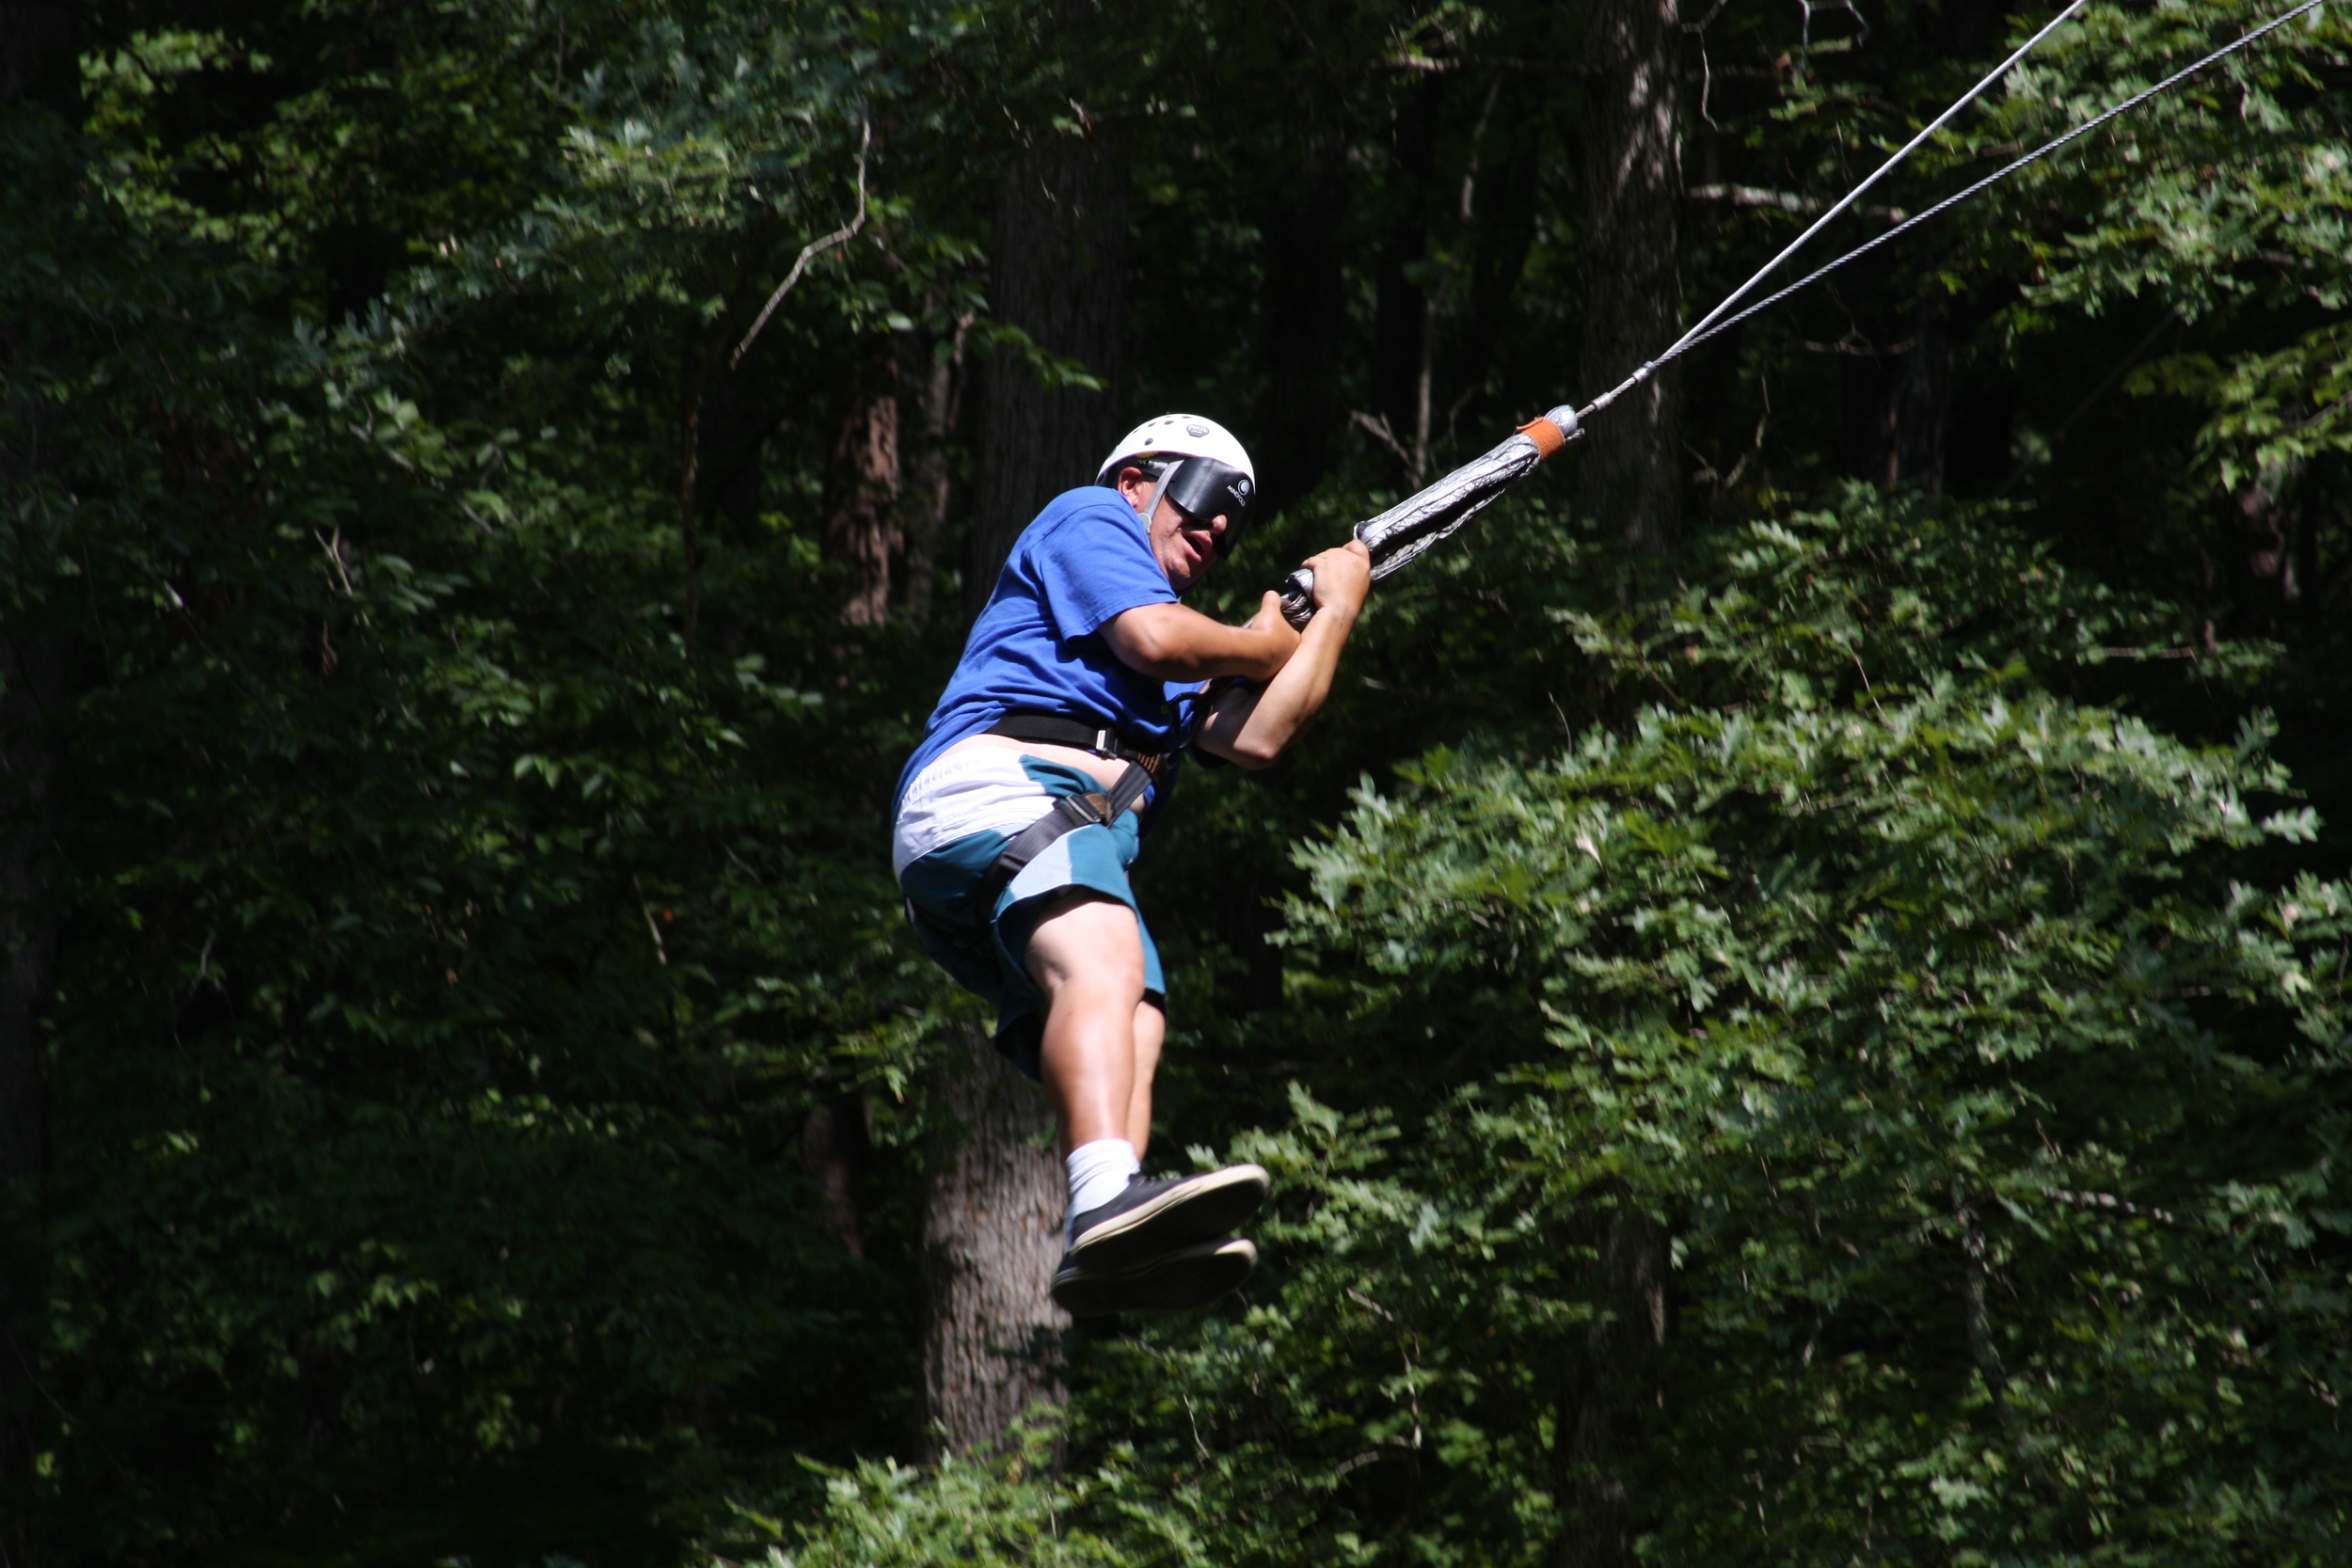 The giant swing at Horn's Creek in Tennessee.  "Just a little hop to the left."